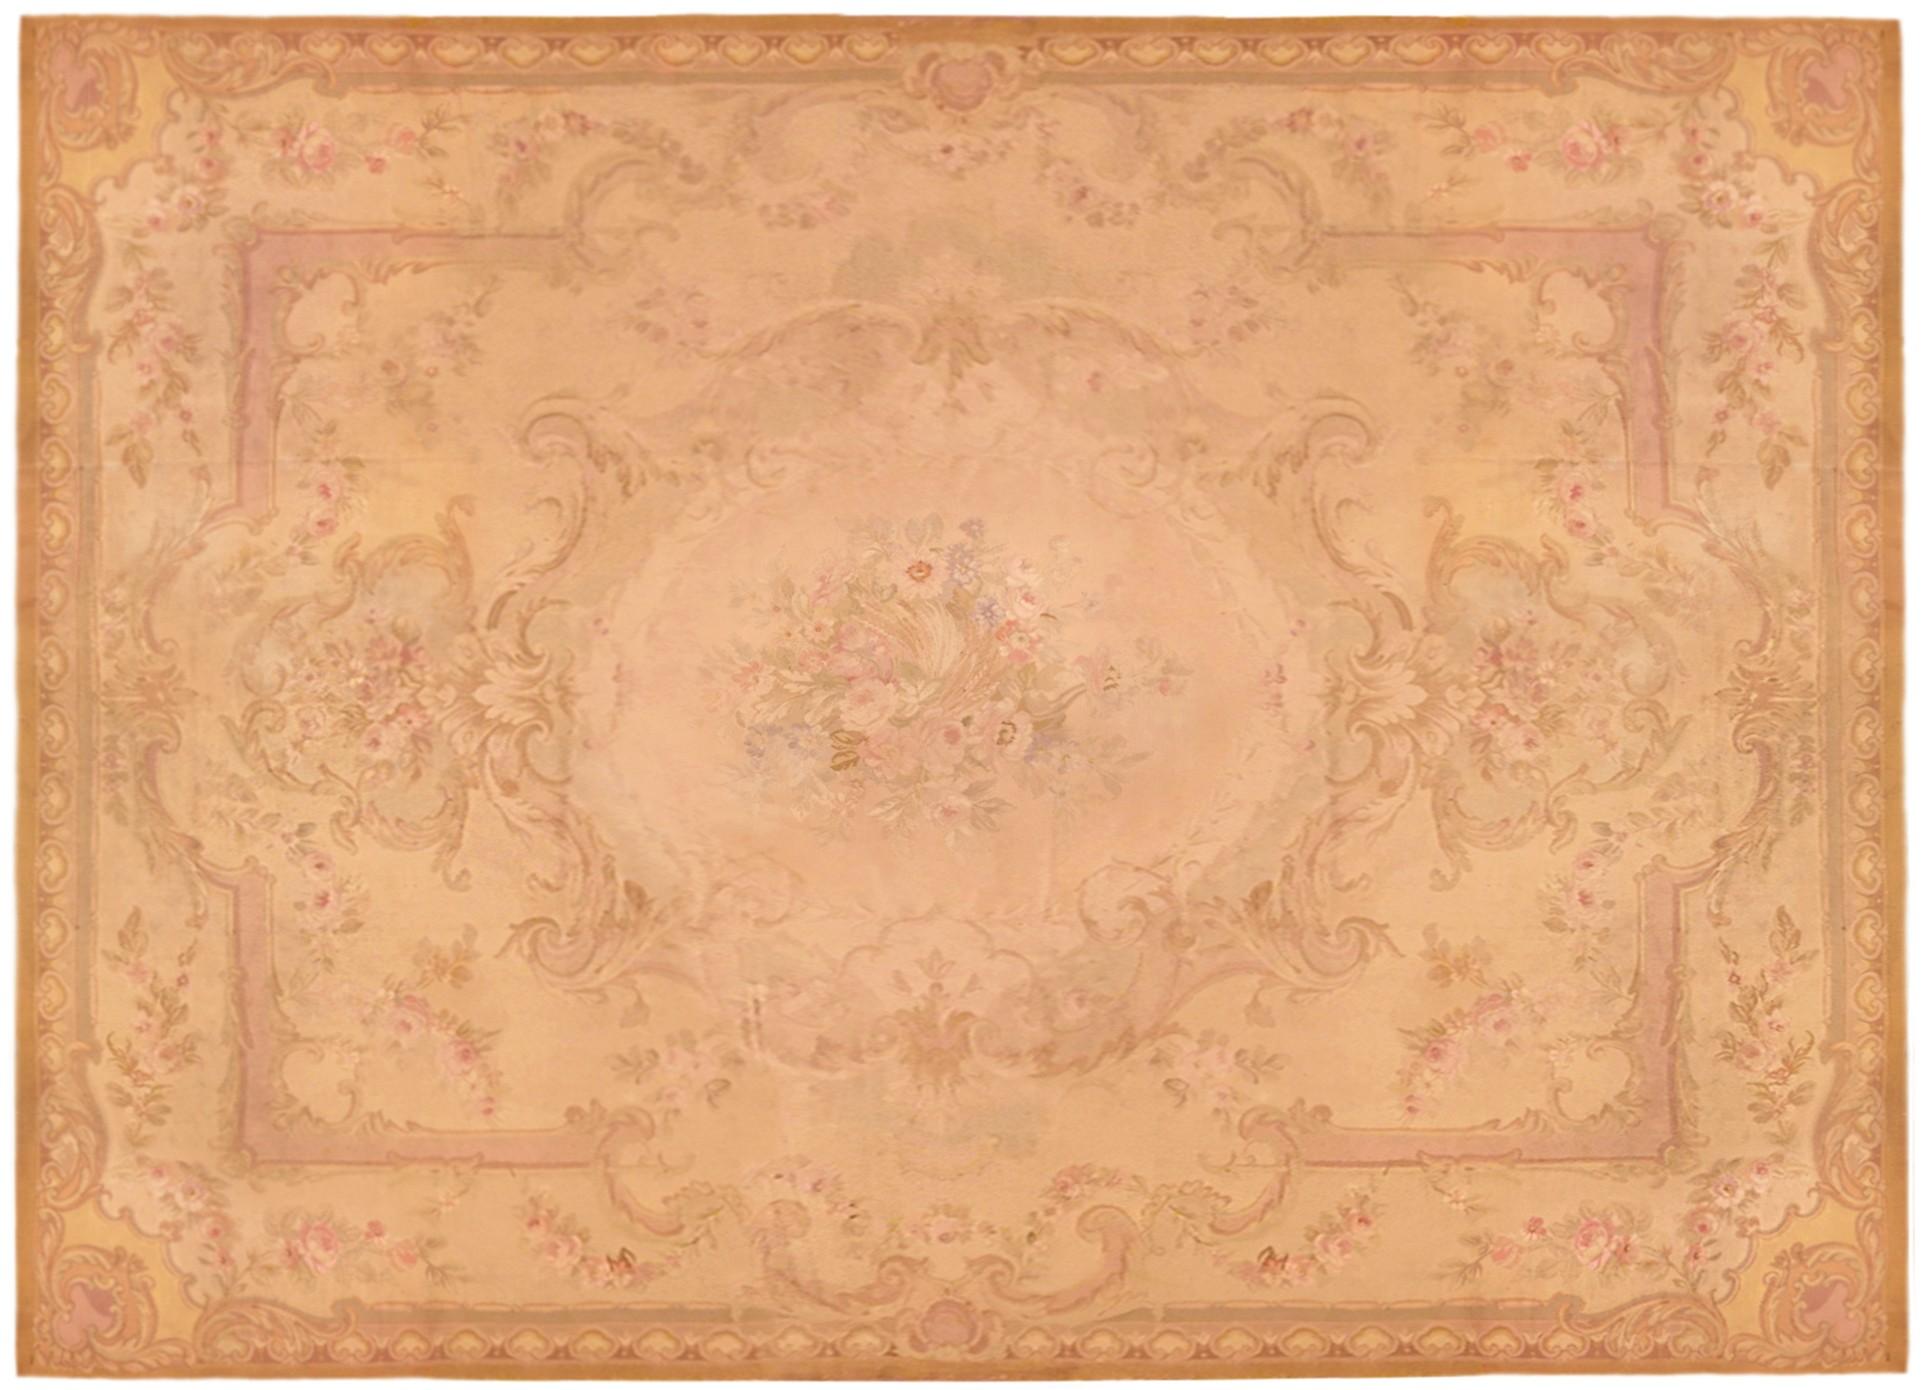 Antique French Aubusson Decorative Flatweave Carpet, in Room Size w/ Soft Colors